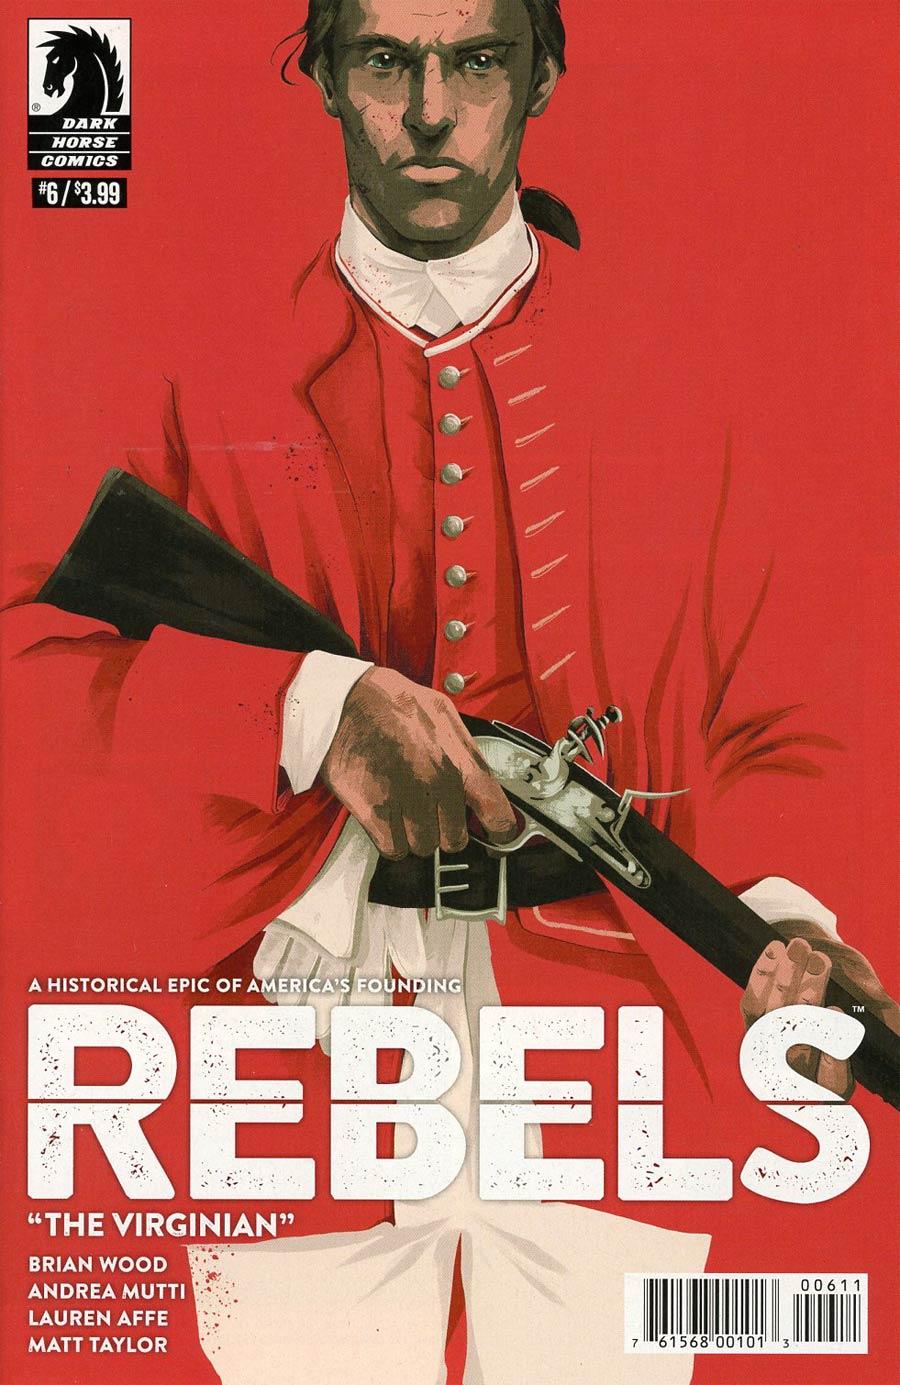 Rebels These Free And Independent States Vol. 1 #6